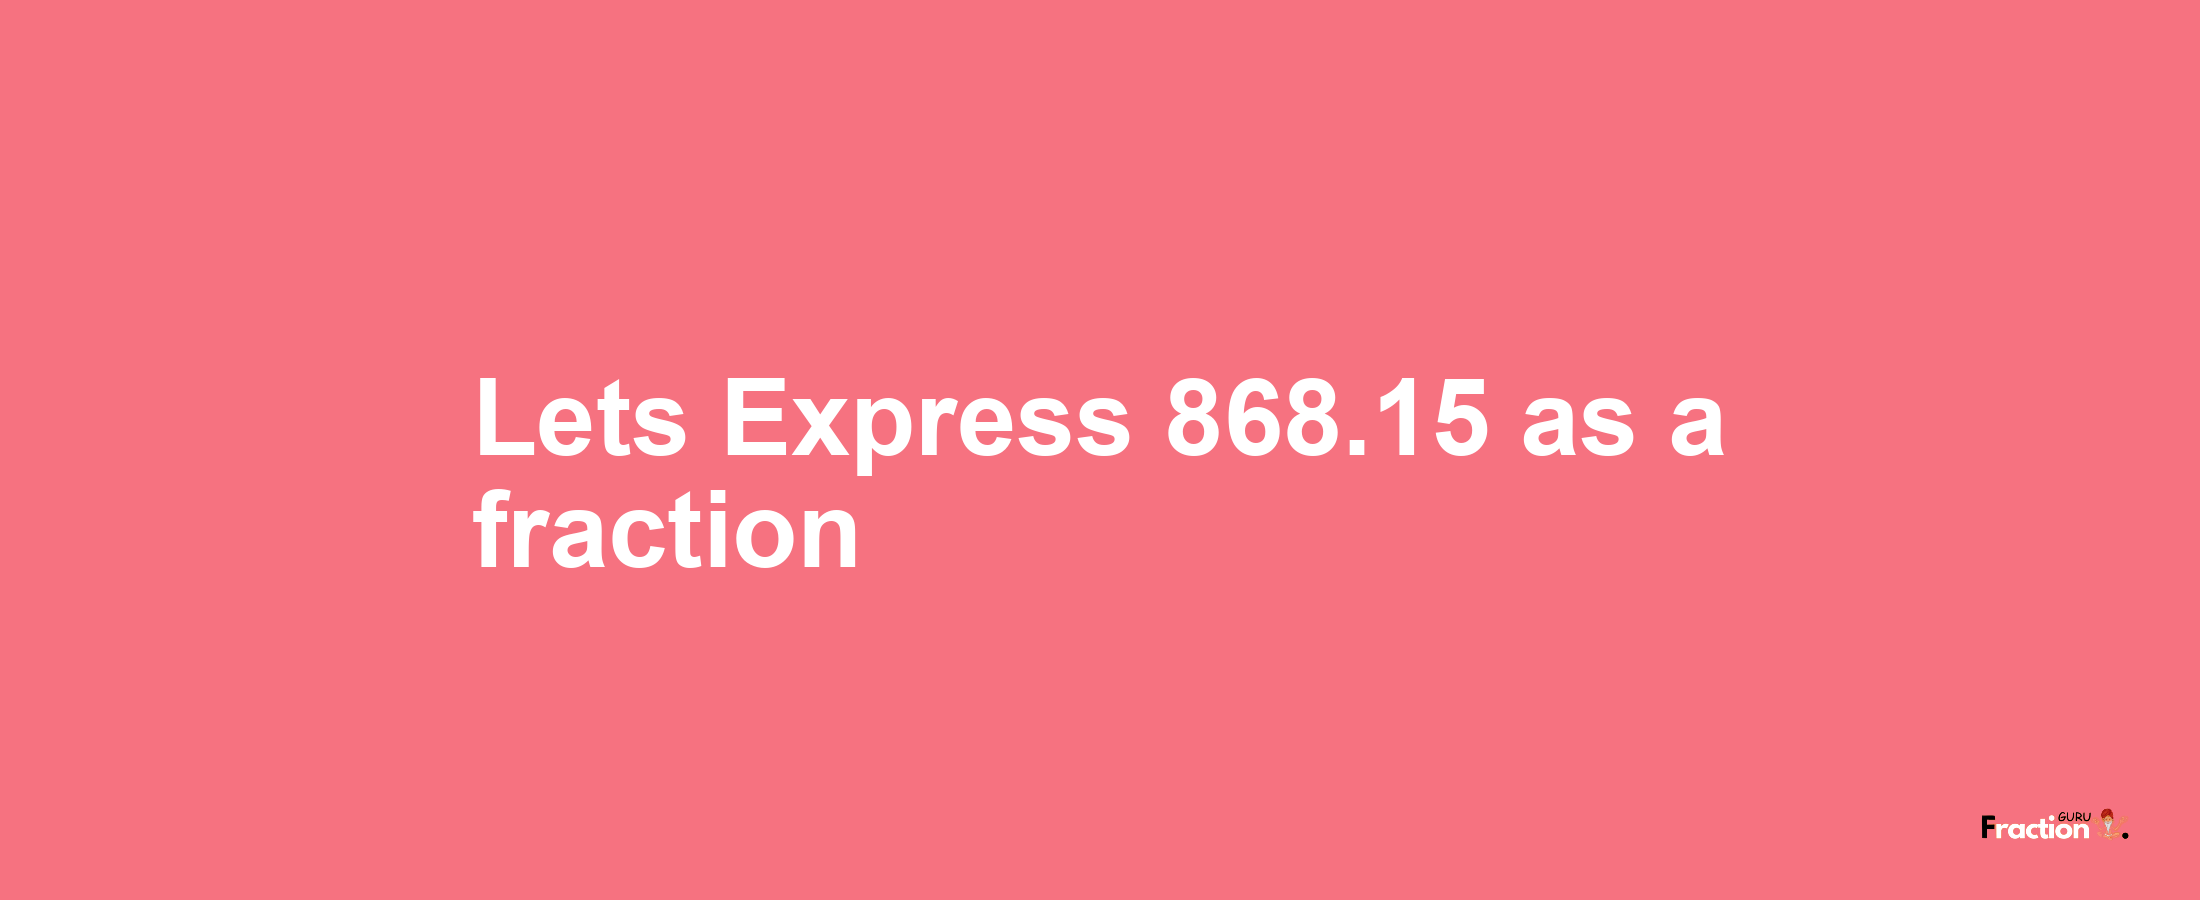 Lets Express 868.15 as afraction